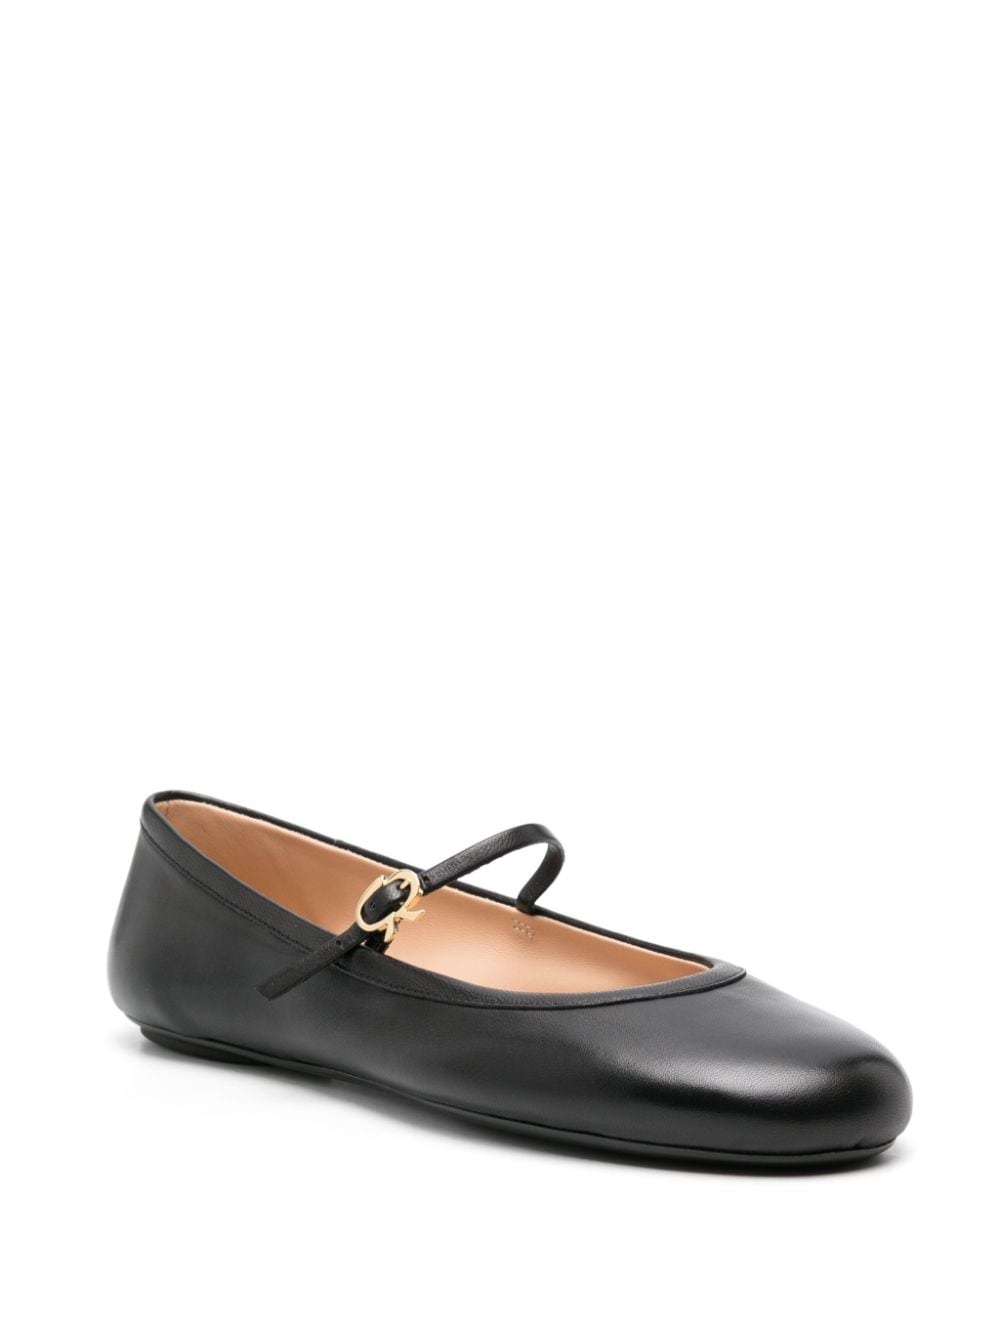 round-toe leather ballerina shoes - 2